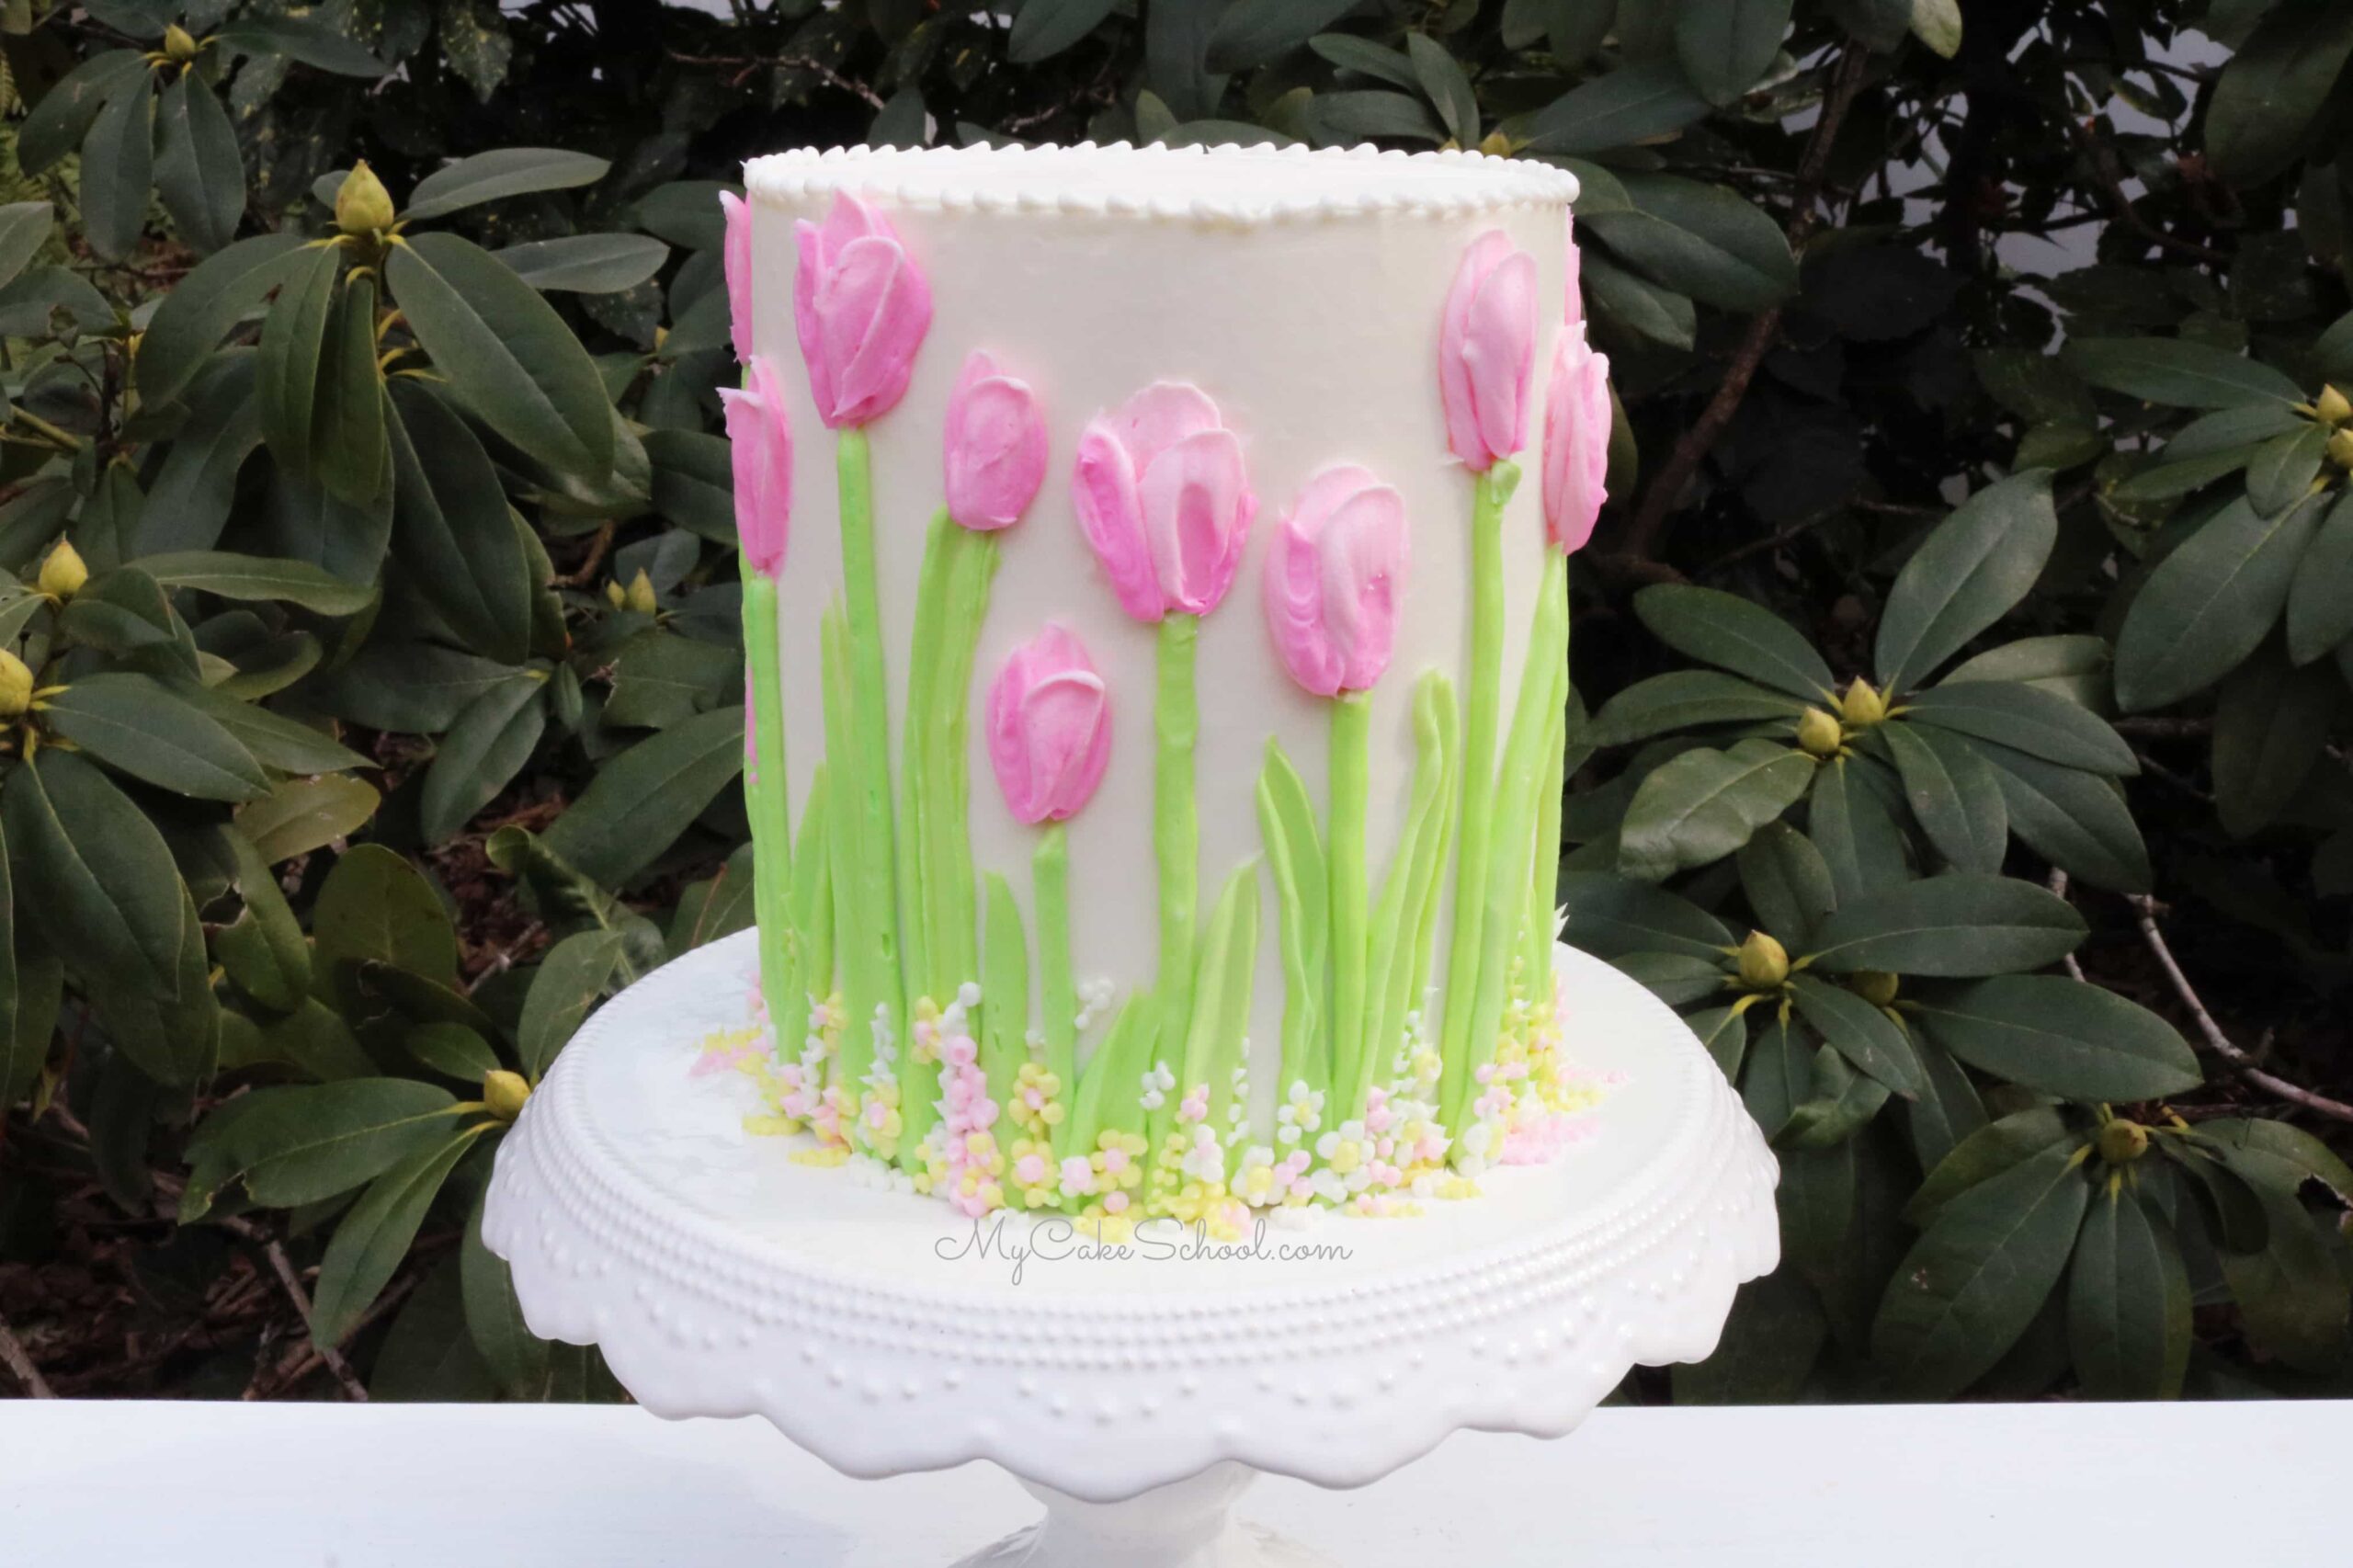 My-Cake-School.-1-scaled Top 10 Online Cake Decorating Classes of 2022